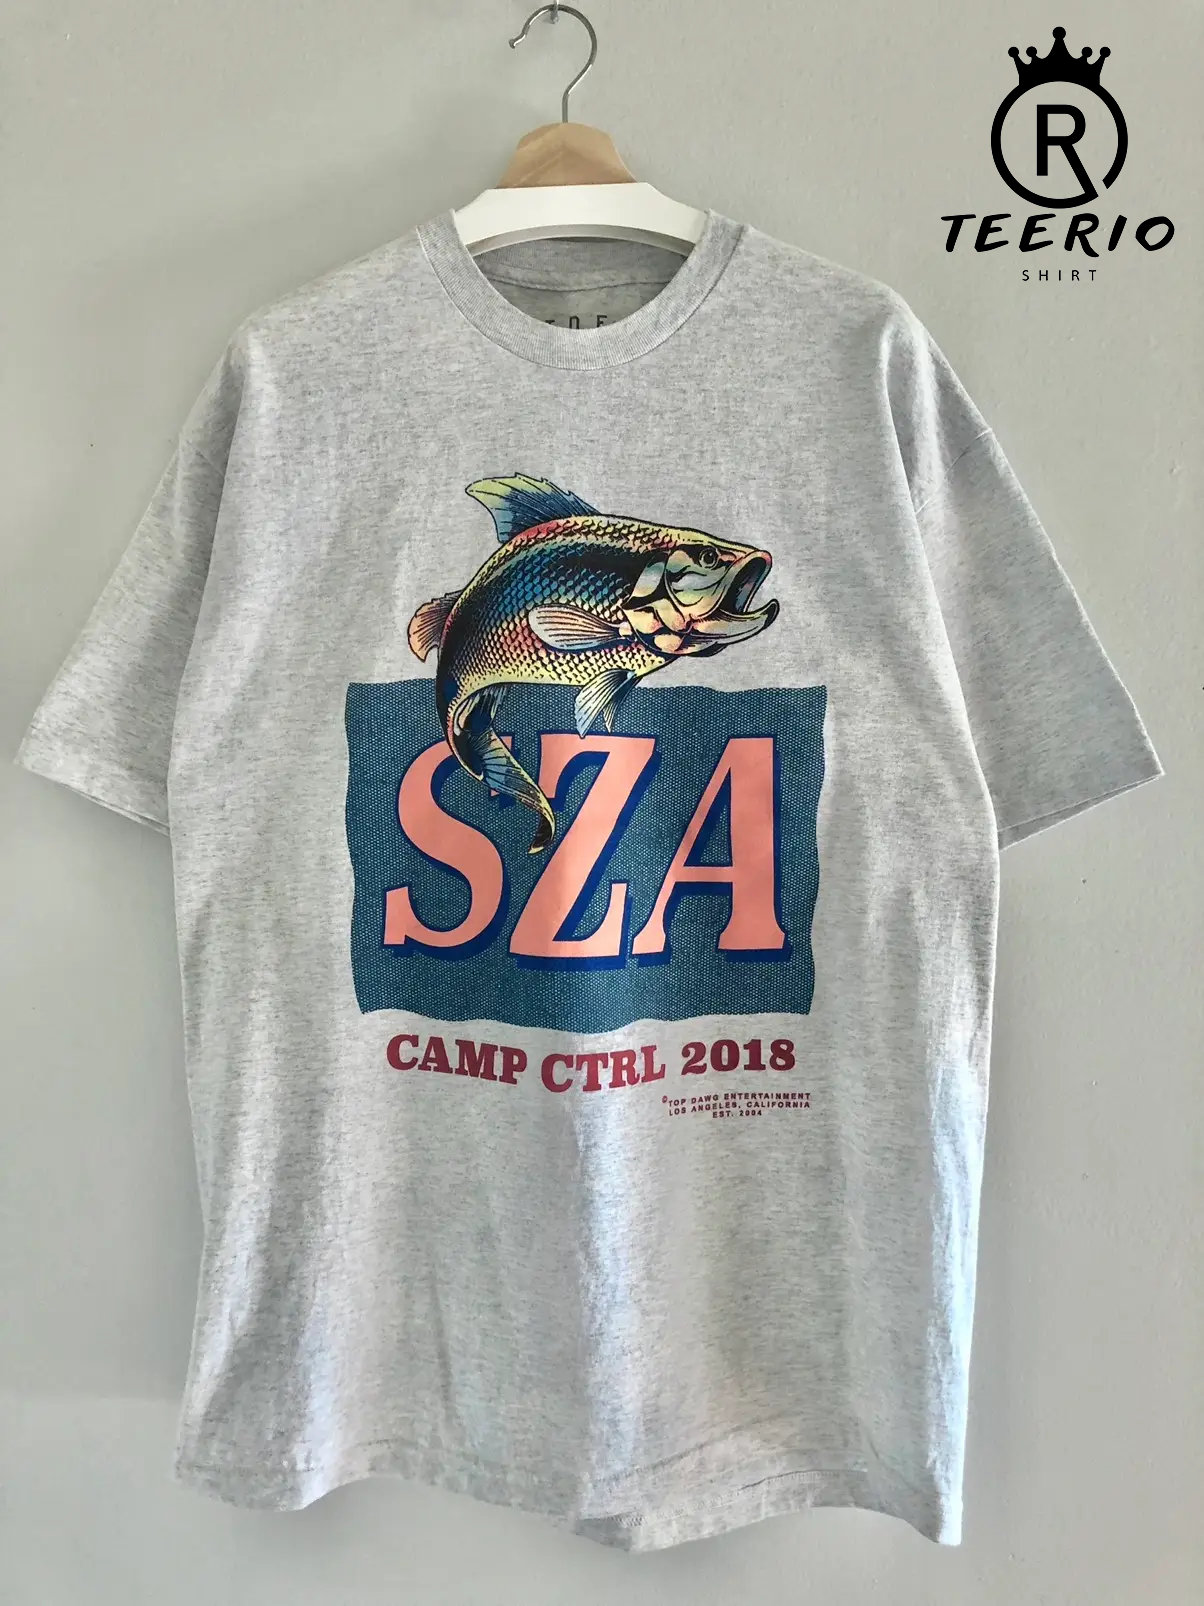 Your Source for R&B Swag: SZA Merchandise Collection